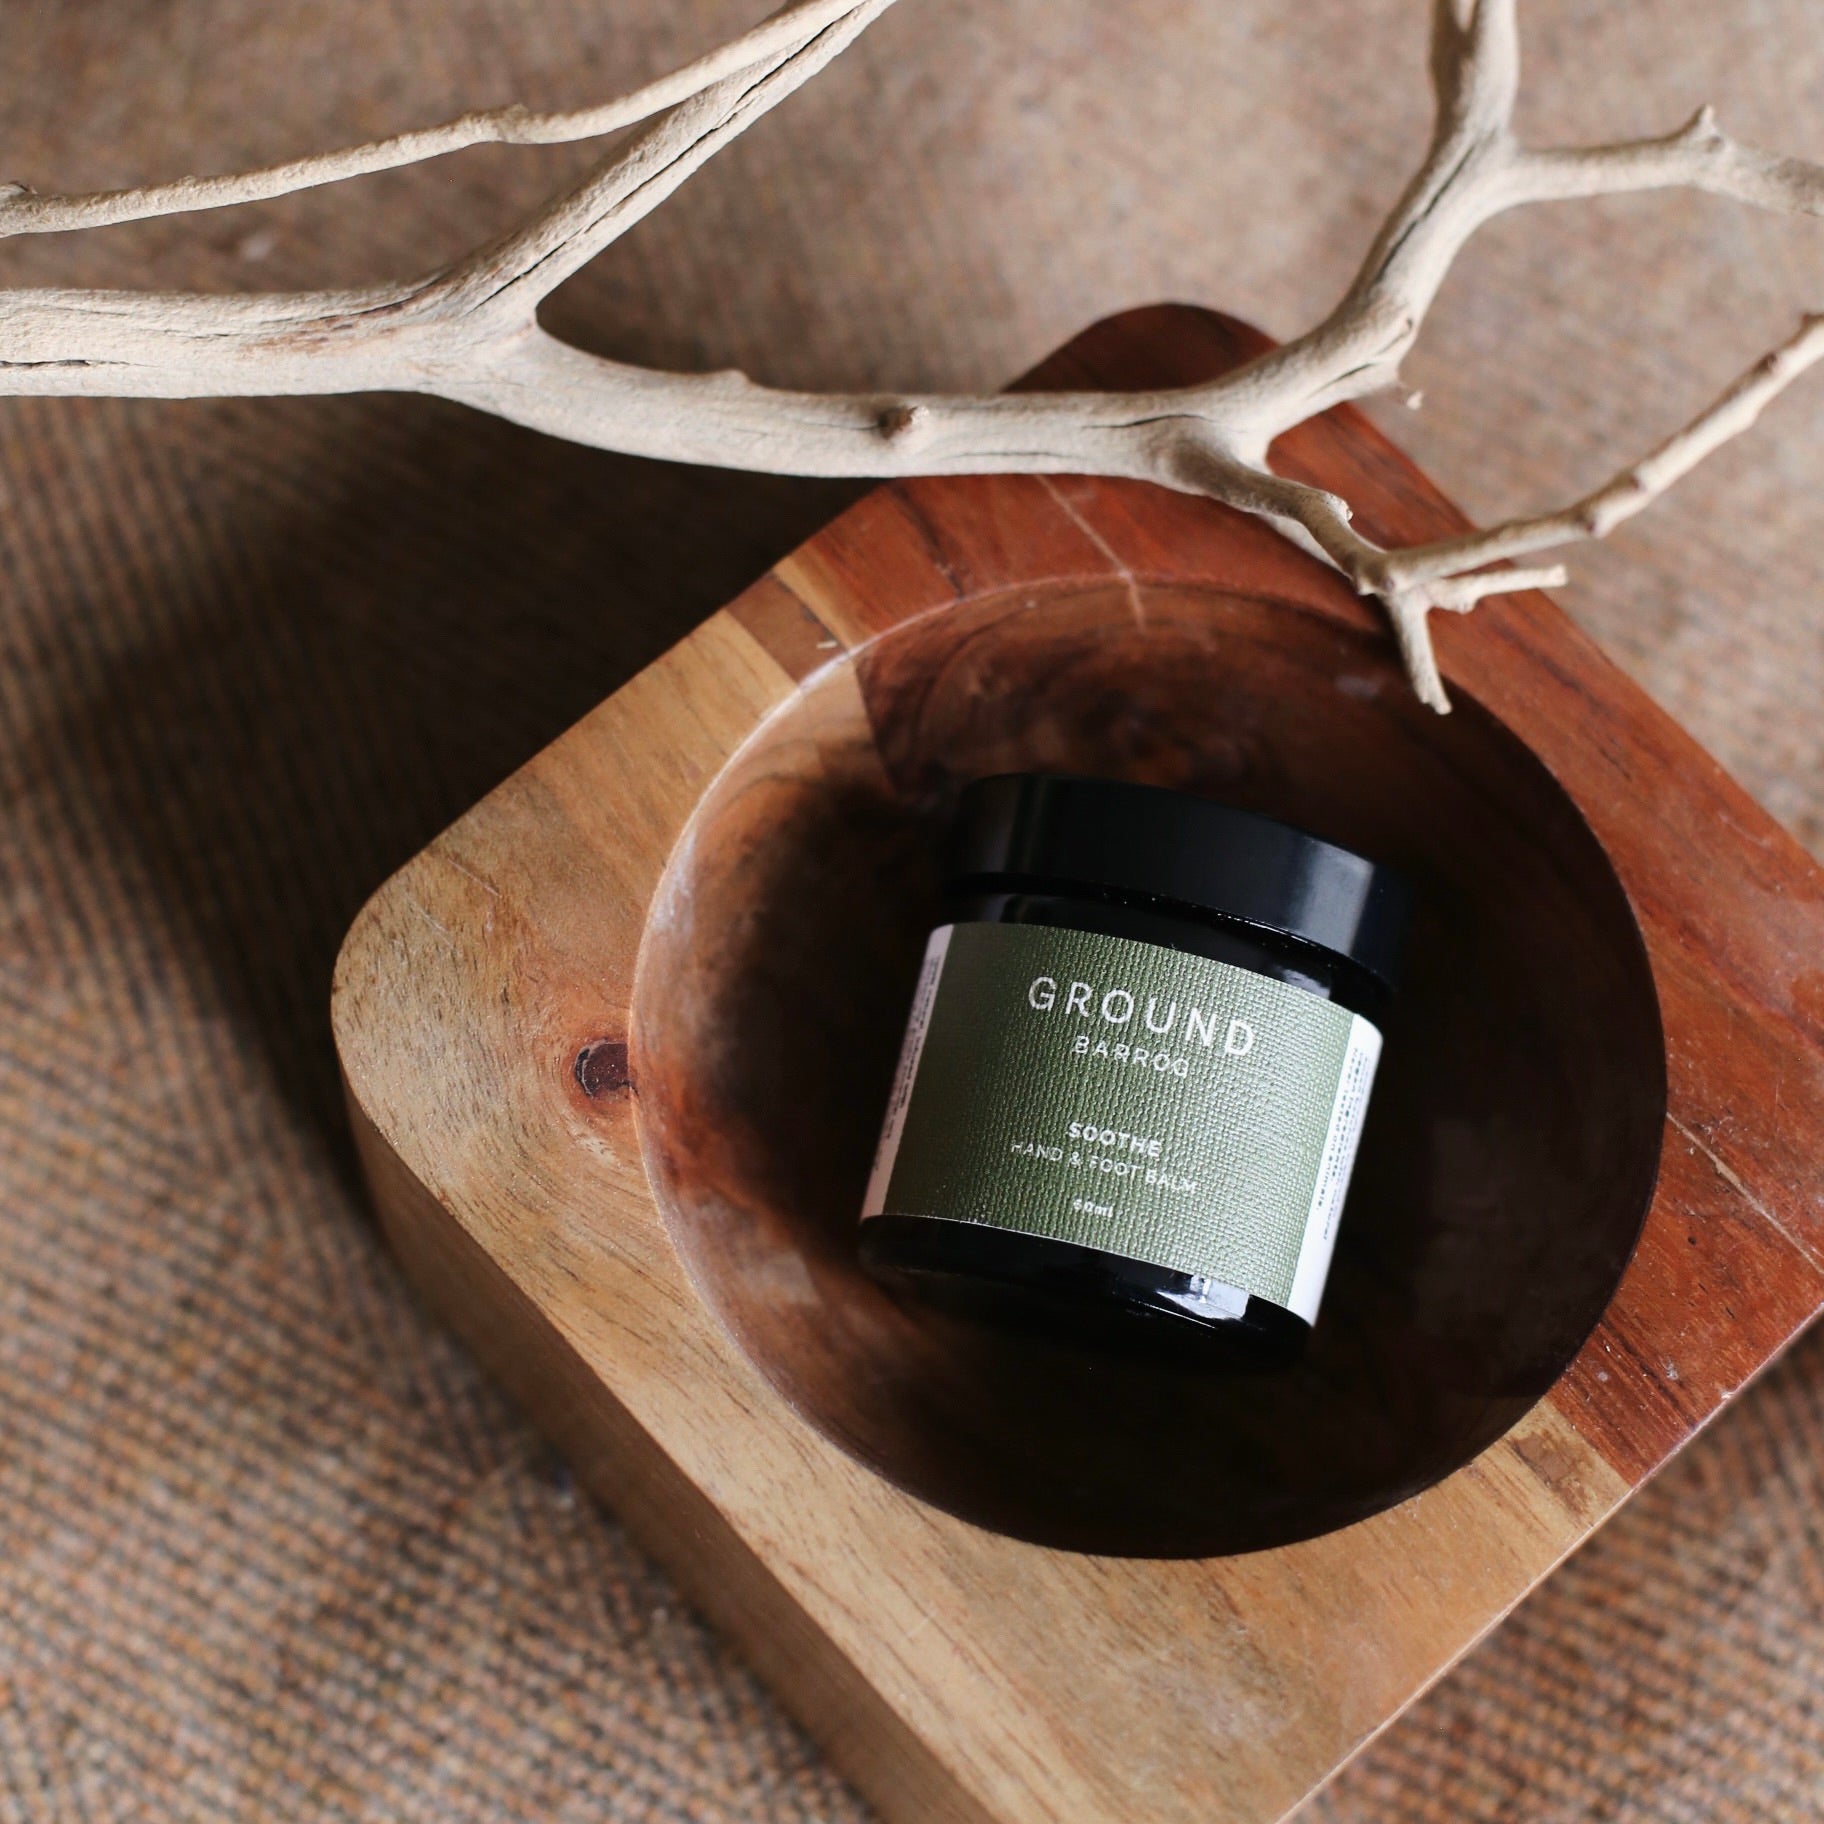 Ground Wellbeing Hand & Foot Balm for Cancer patients